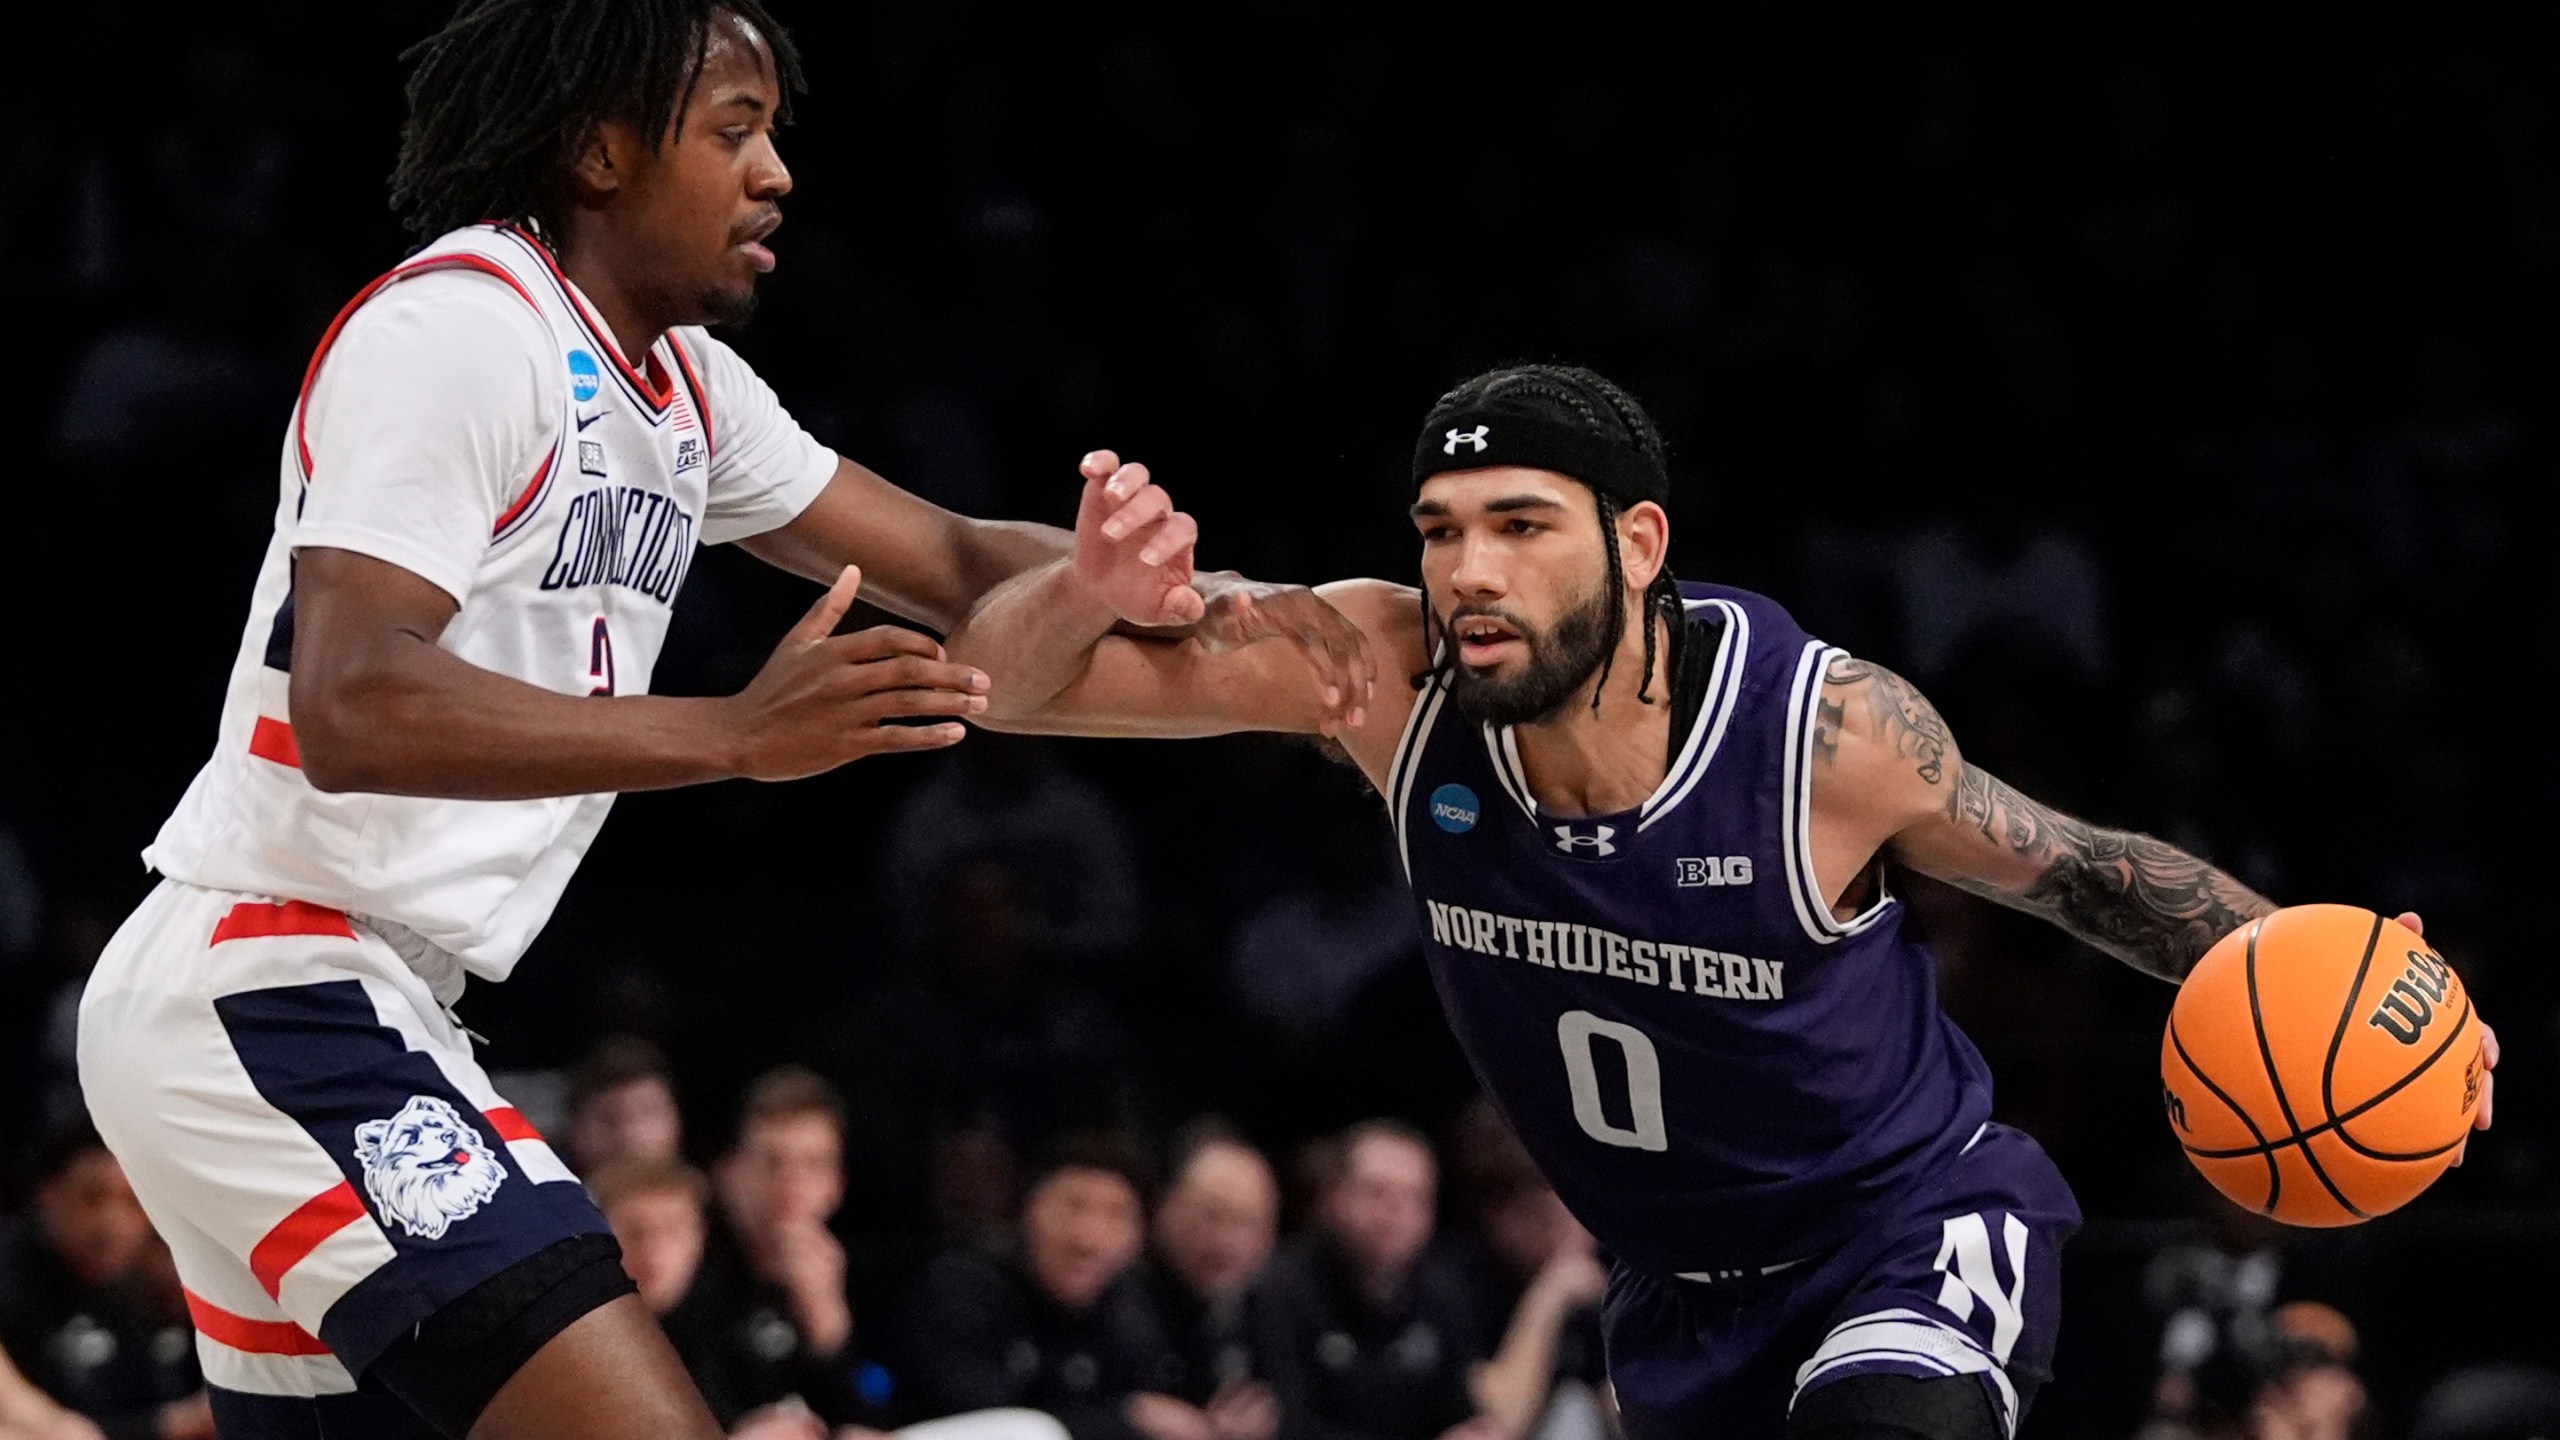 UConn's Tristen Newton, left, defends against Northwestern's Boo Buie during the first half of a second-round college basketball game in the NCAA Tournament Sunday, March 24, 2024, in New York. (AP Photo/Frank Franklin II)